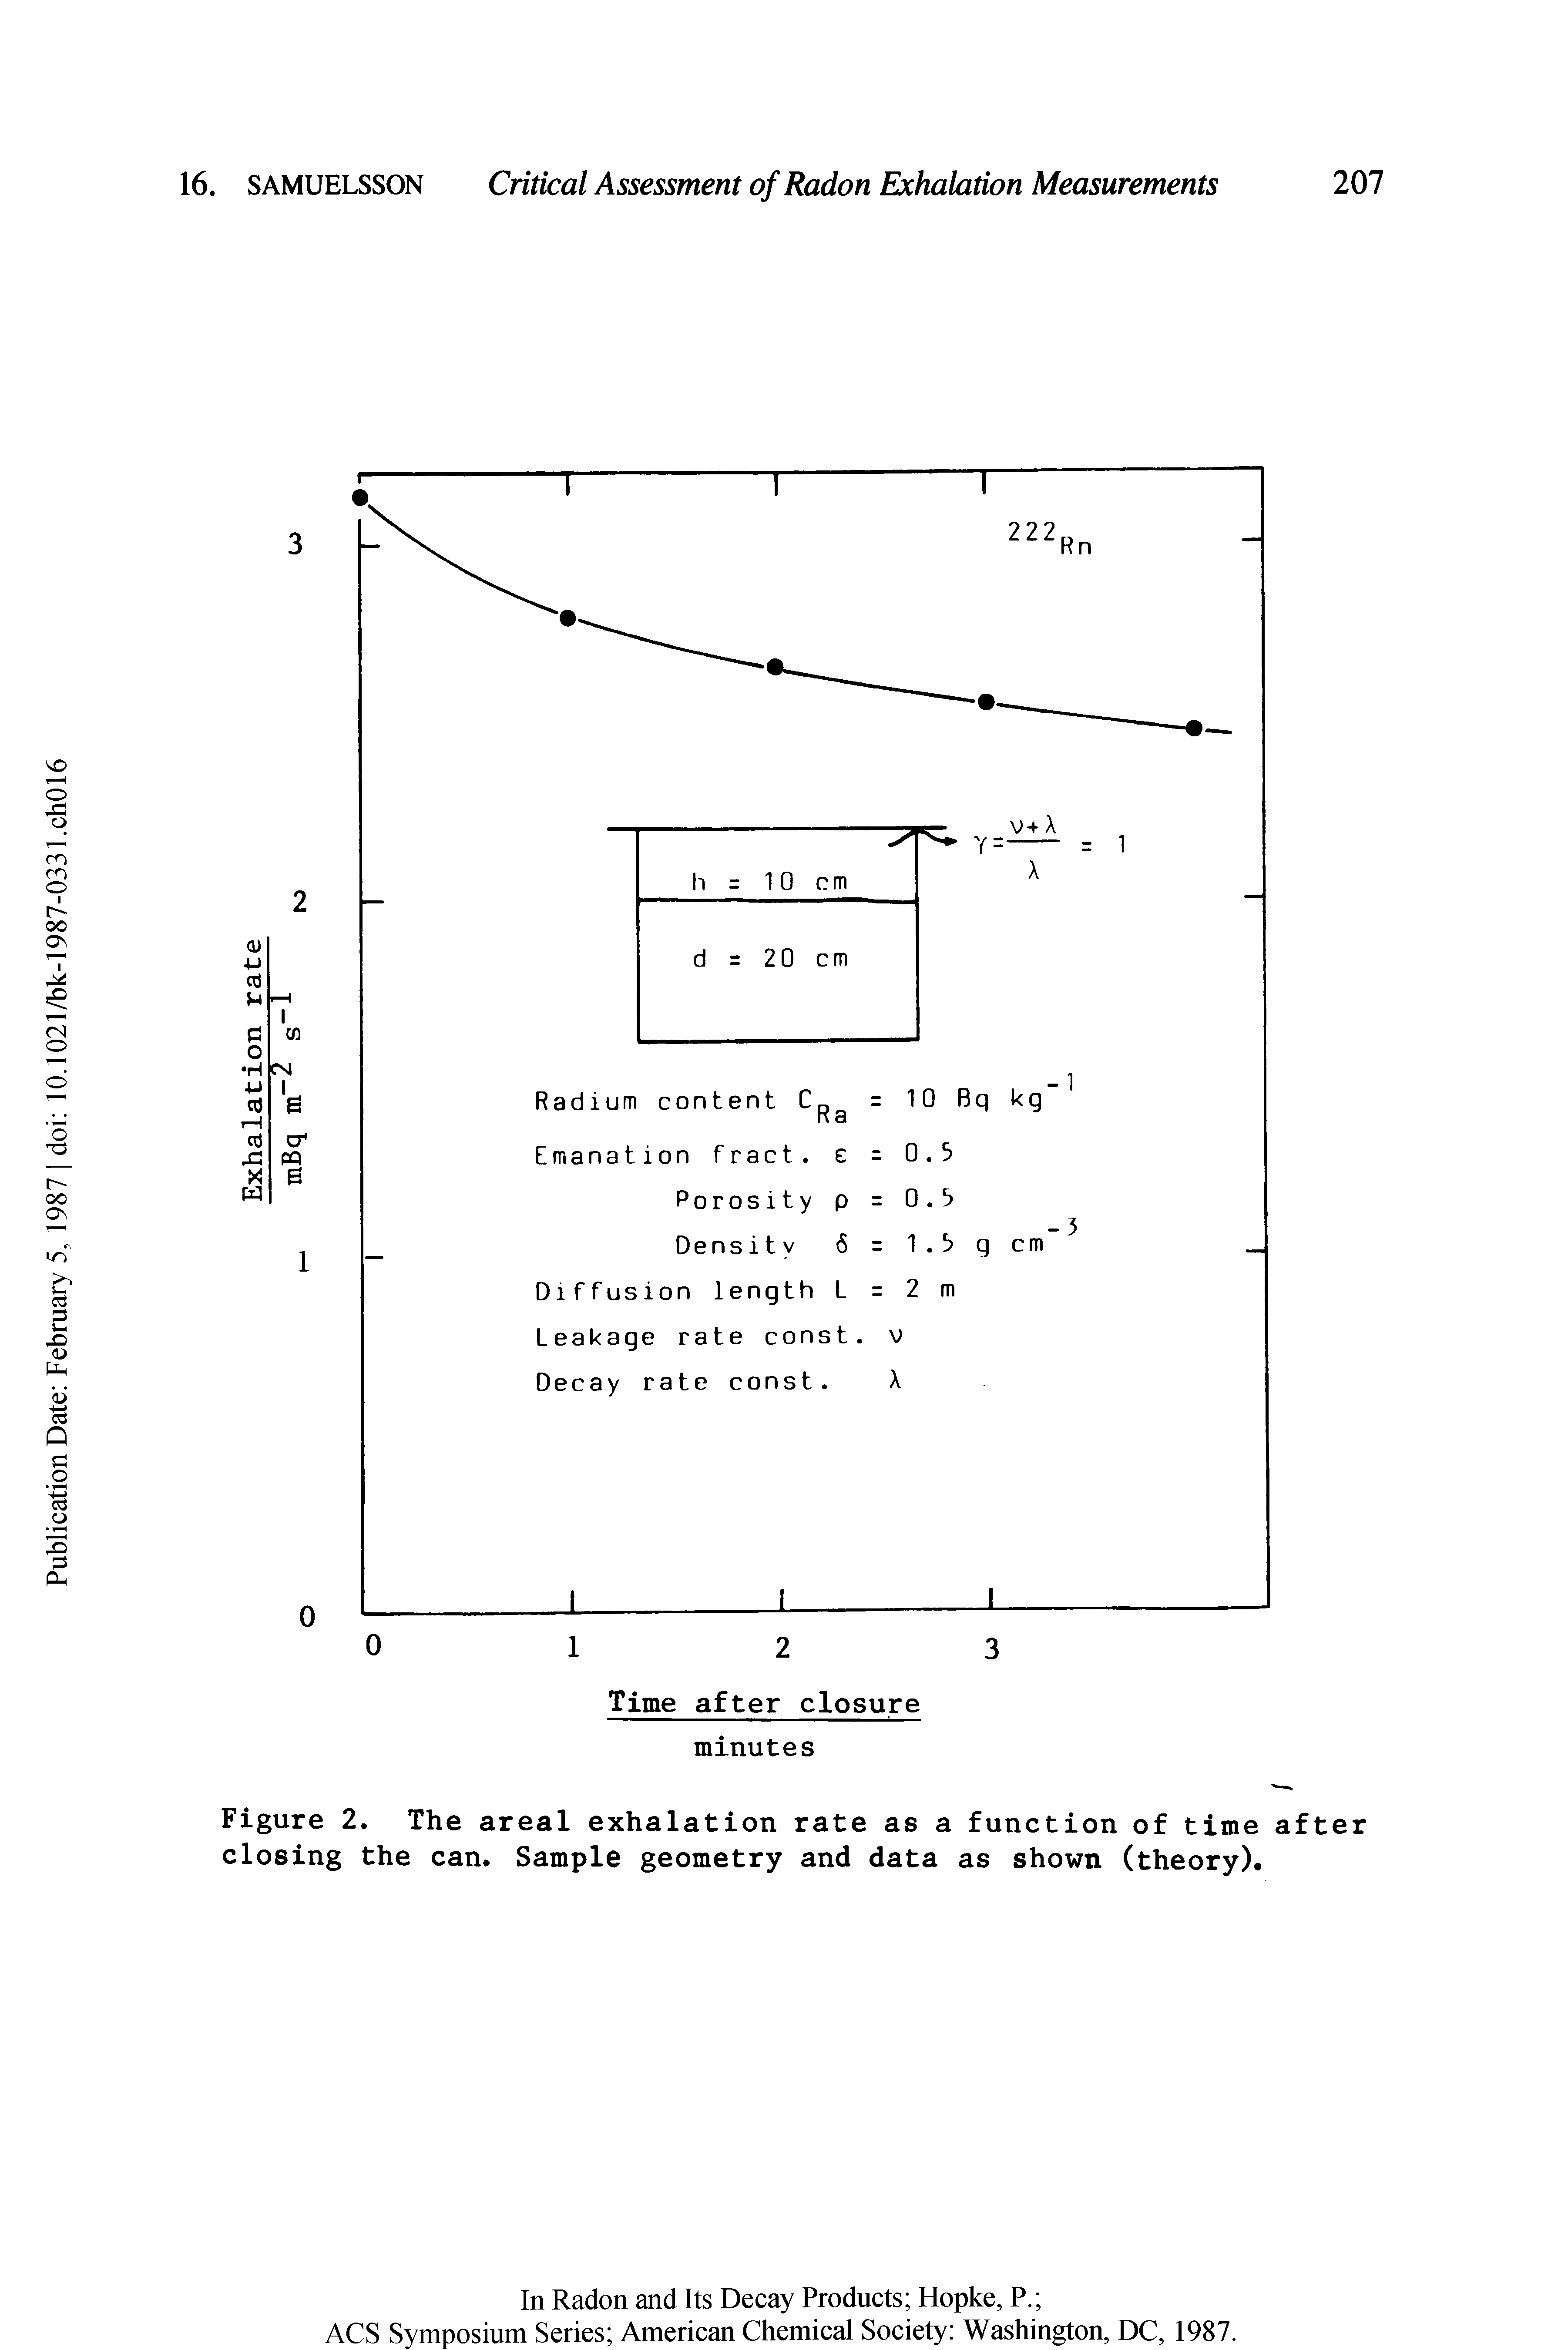 Figure 2. The areal exhalation rate as a function of time after closing the can. Sample geometry and data as shown (theory).